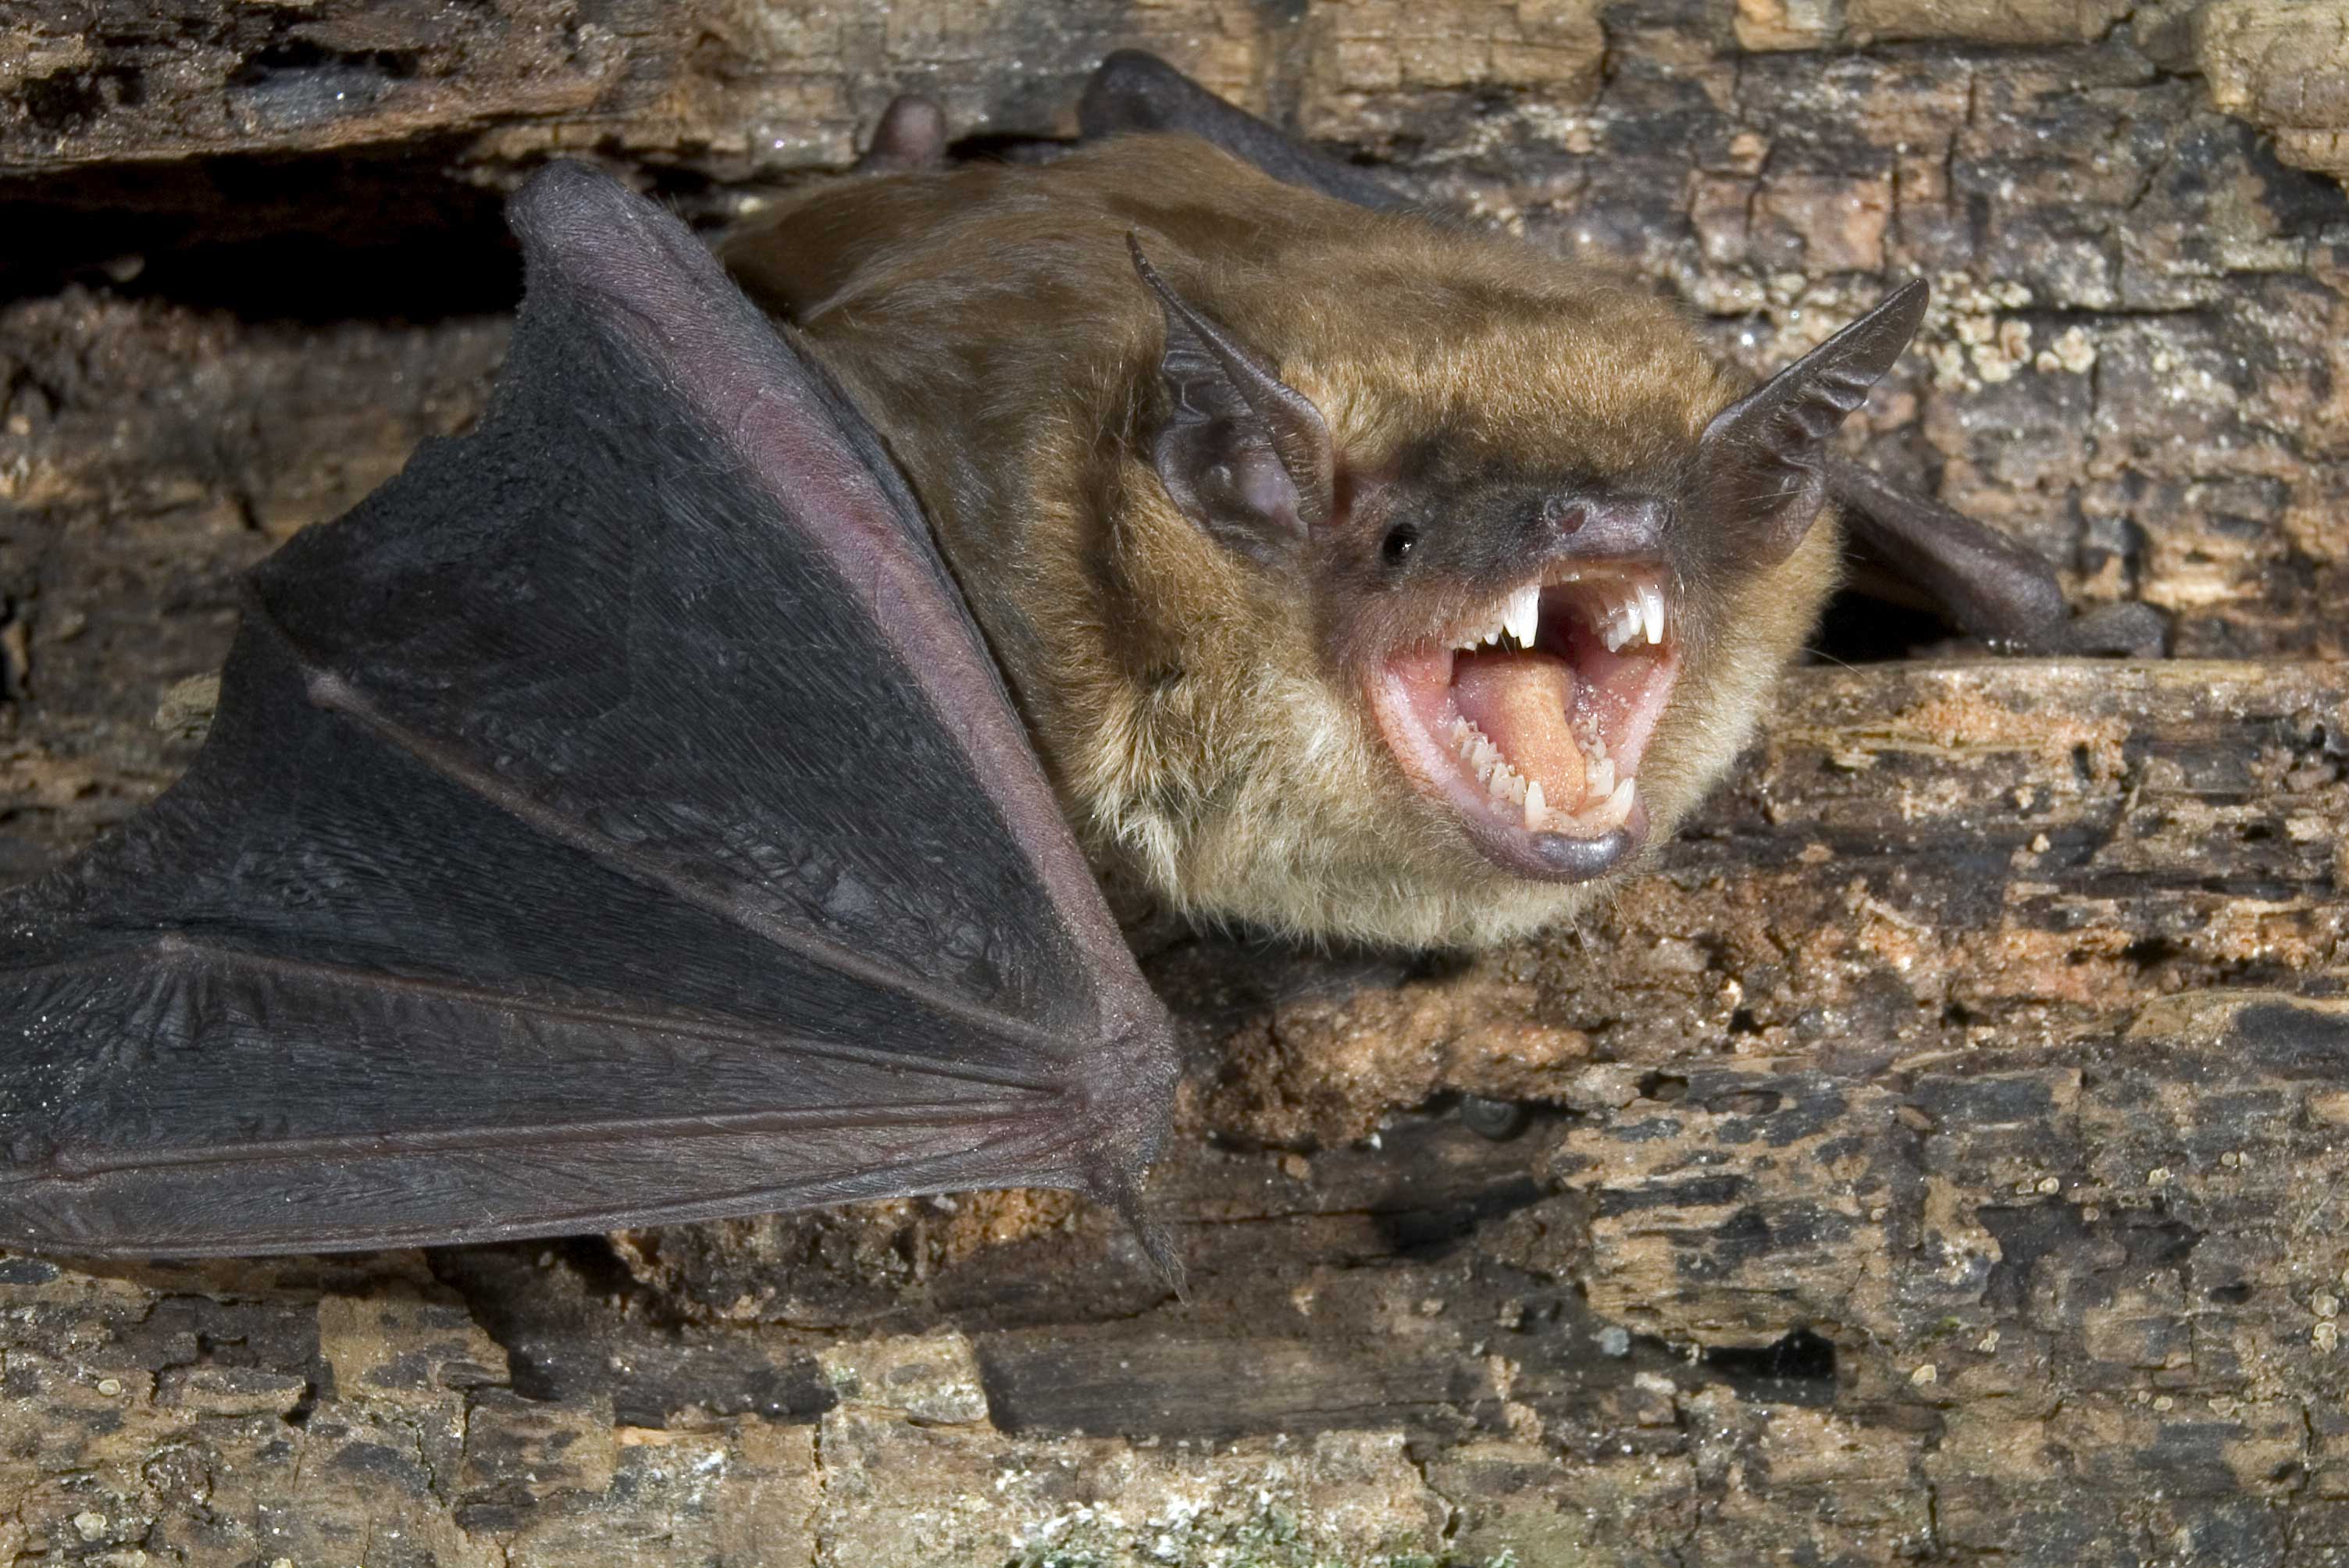 A brown bat in a cave shows off its fangs.